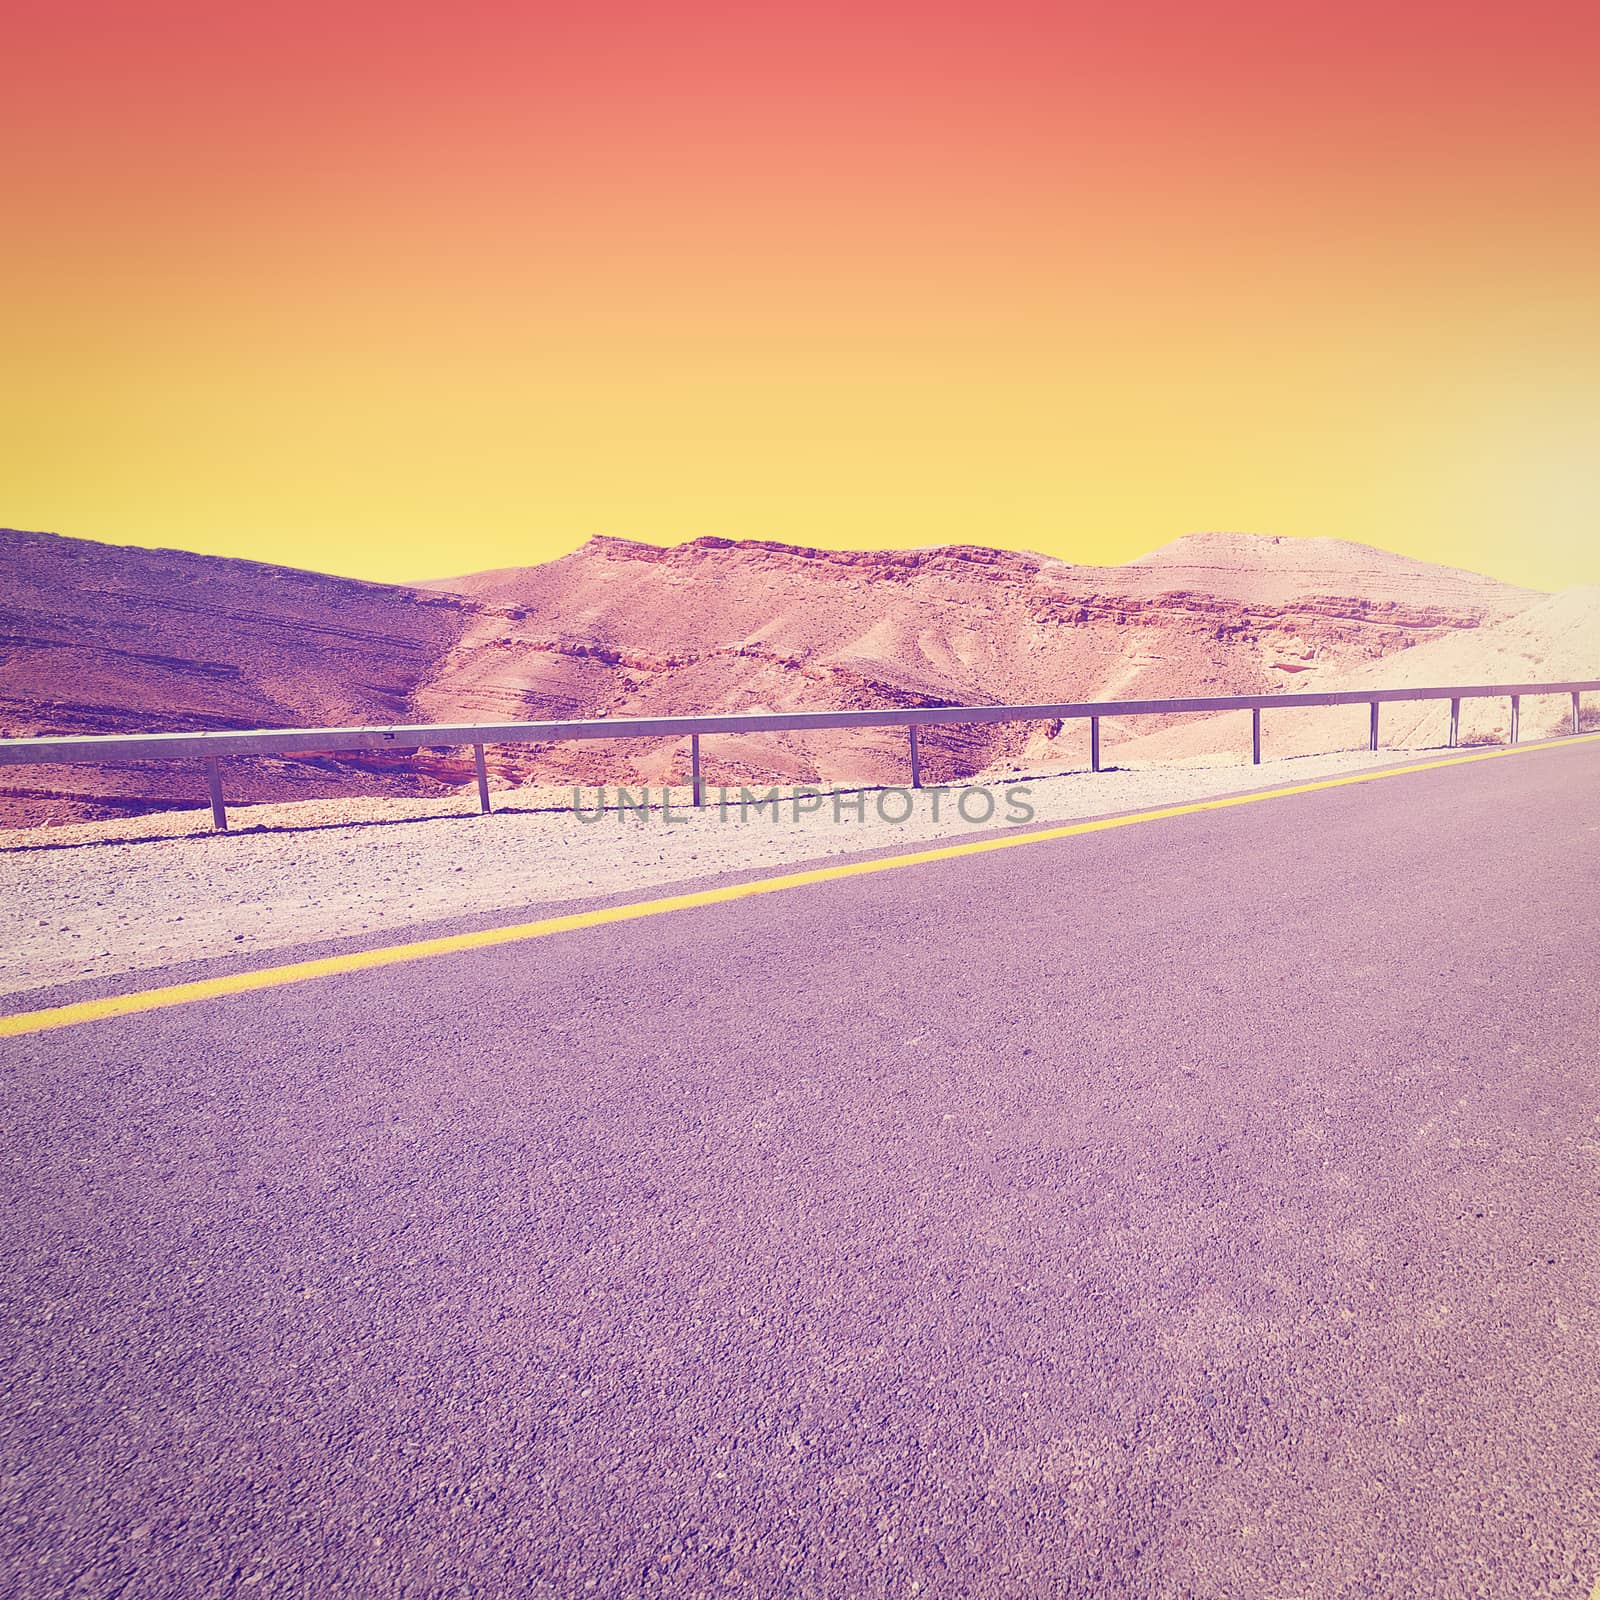 Meandering Road in Sand Hills of Judean Mountains at Sunset, Instagram Effect